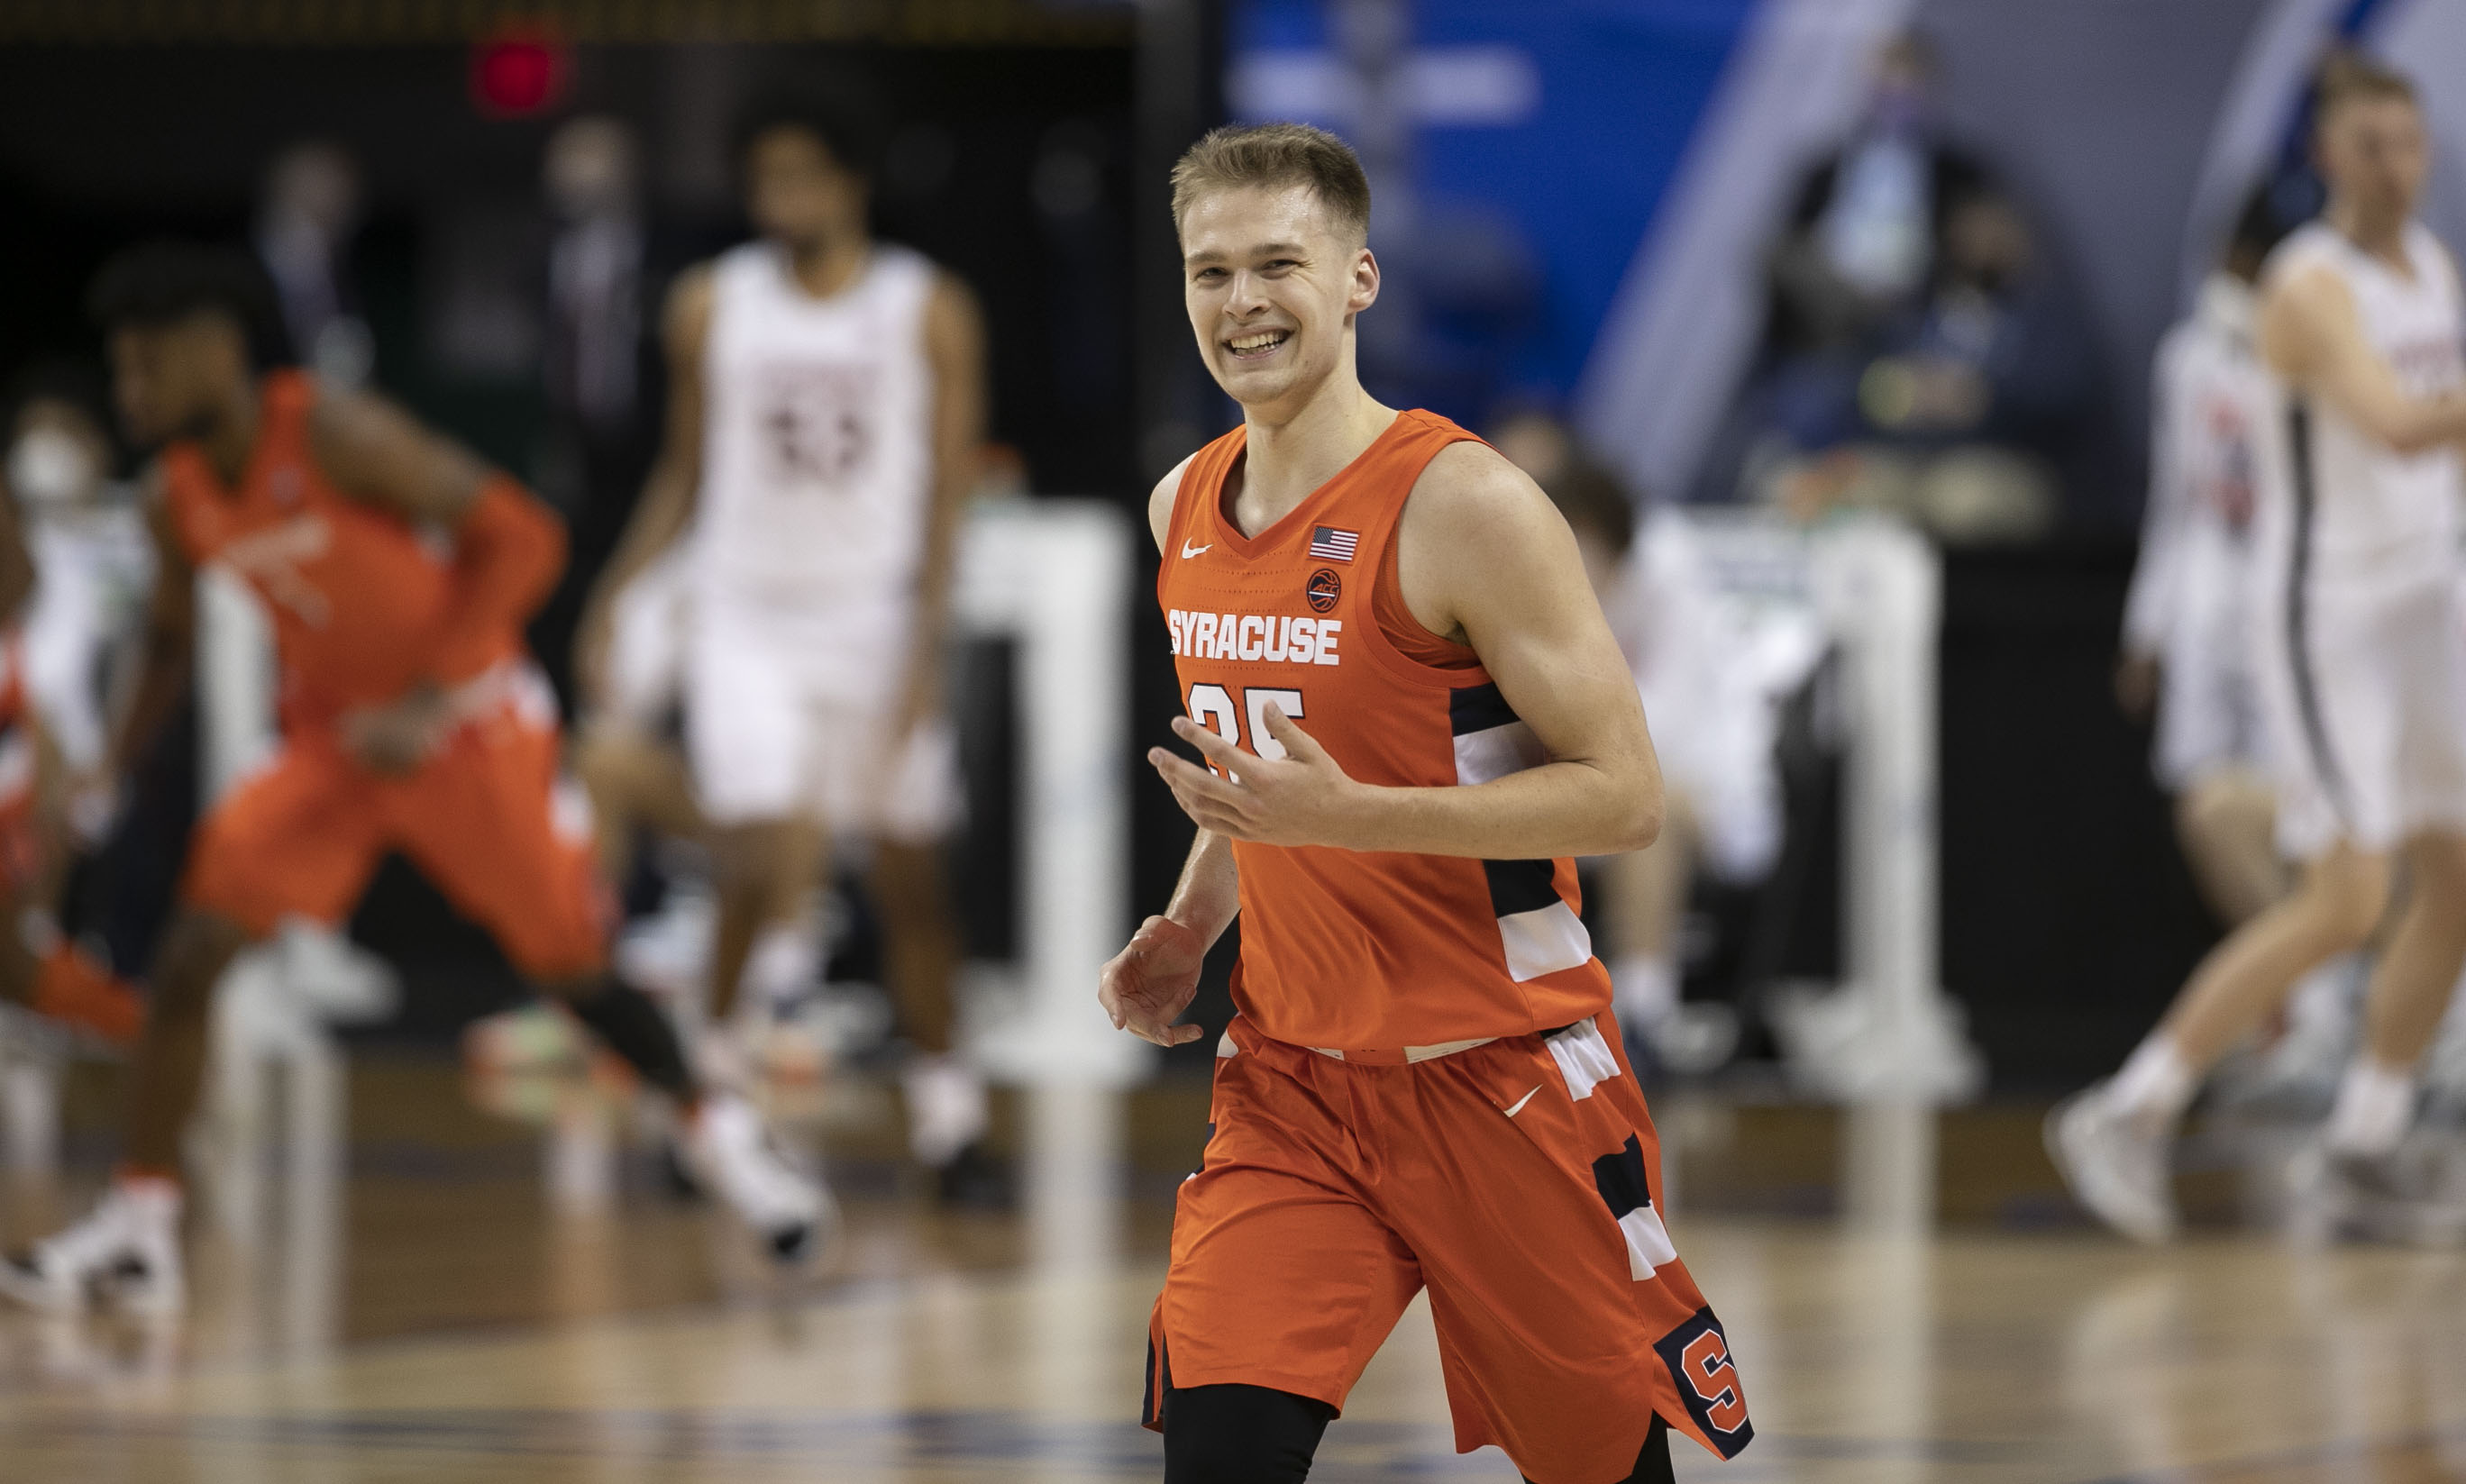 Syracuse’s Buddy Boeheim (35) flashes a smile after sinking a three-point basket to give Syracuse an early lead over Virginia on Thursday, March 11, 2021 during the ACC Tournament at the Greensboro Coliseum in Greensboro, N.C.